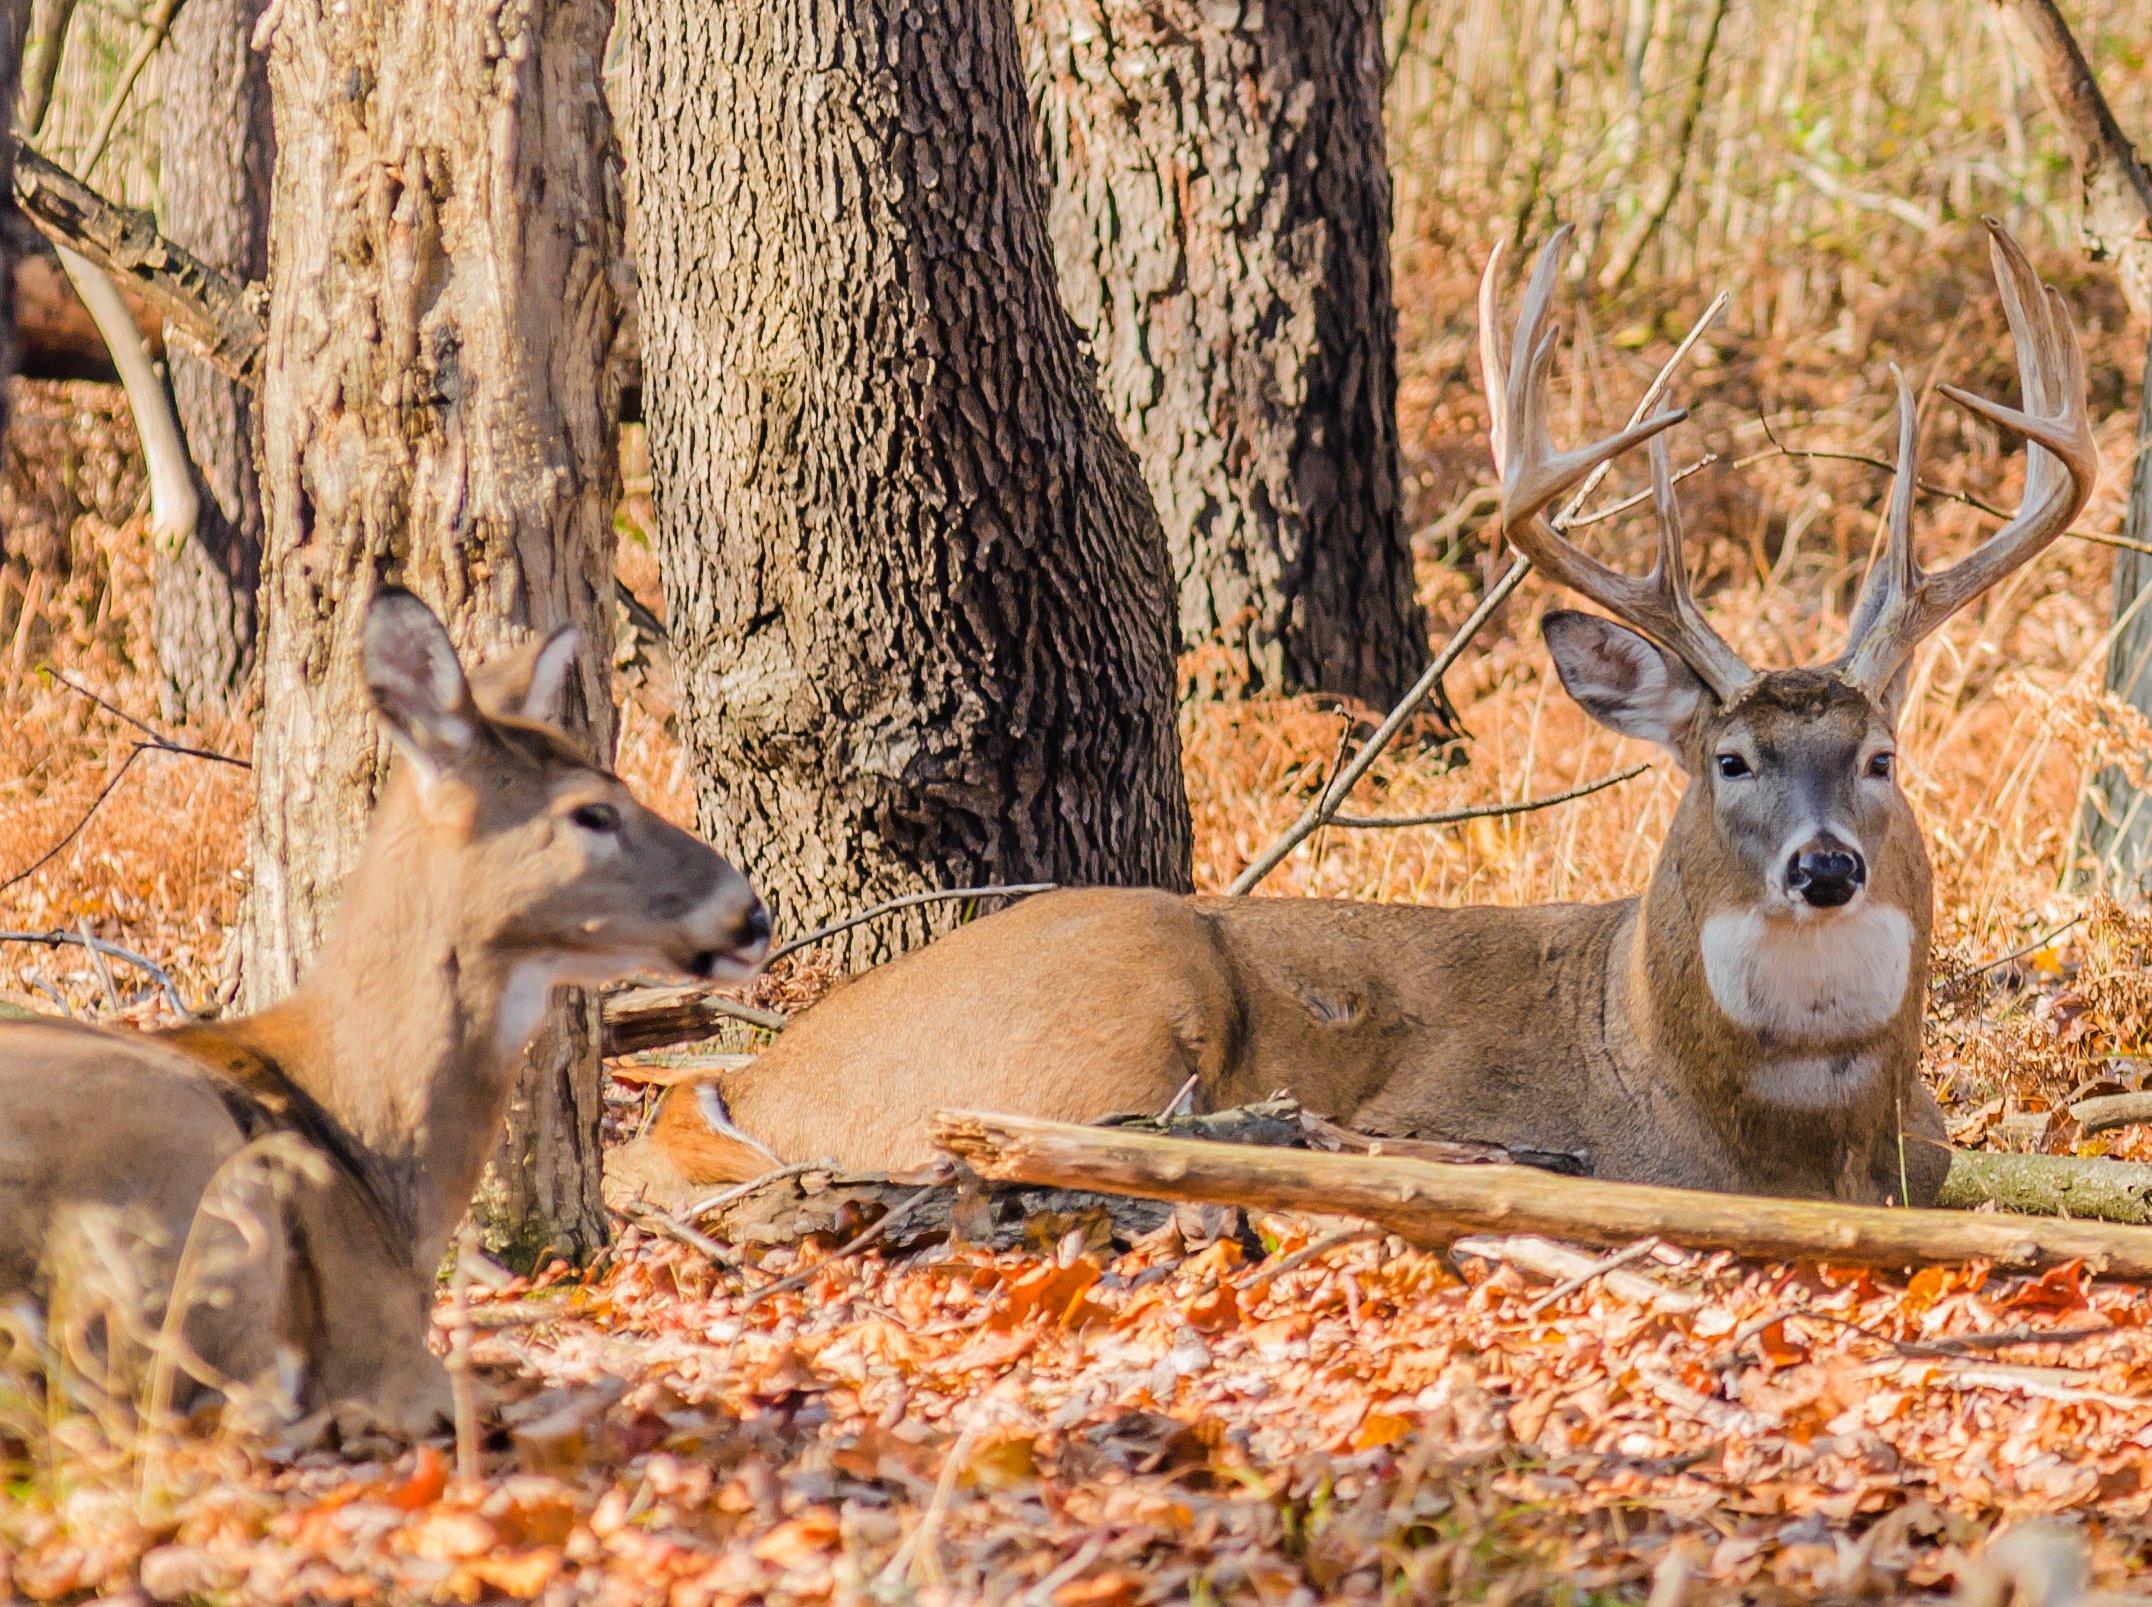 Try a new tactic this deer season. Image by Bruce MacQueen